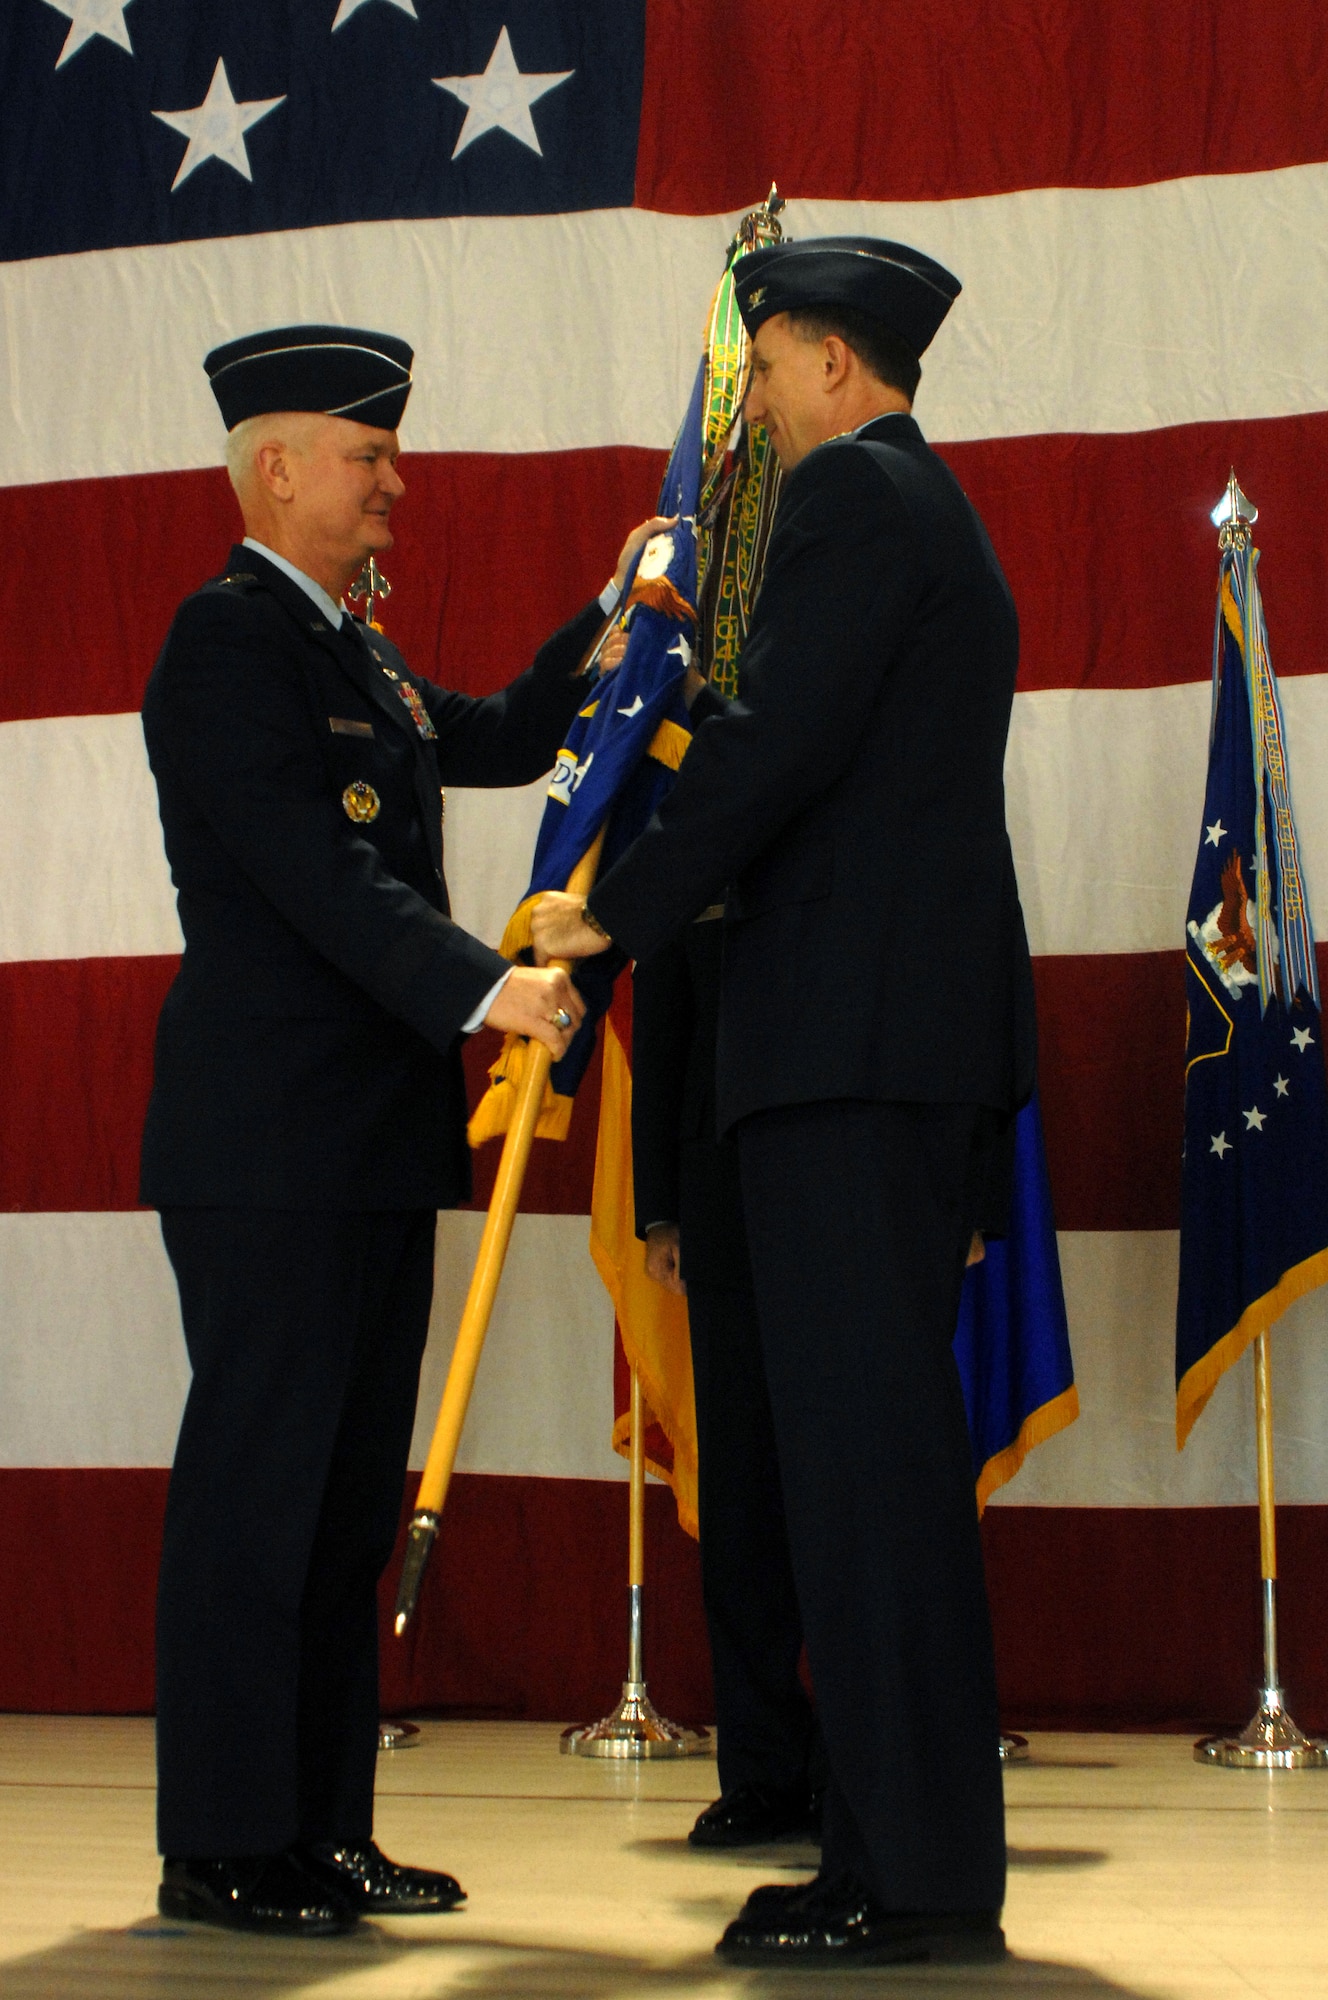 Col. Bill Bender accepts the 86th Airlift Wing flag from Lt. Gen. Rod Bishop, 3rd Air Force commander, at a change of command ceremony Dec. 19 in Ramstein's Hangar 1. (U.S. Air Force photo/Airman 1st Class Kenny Holston)